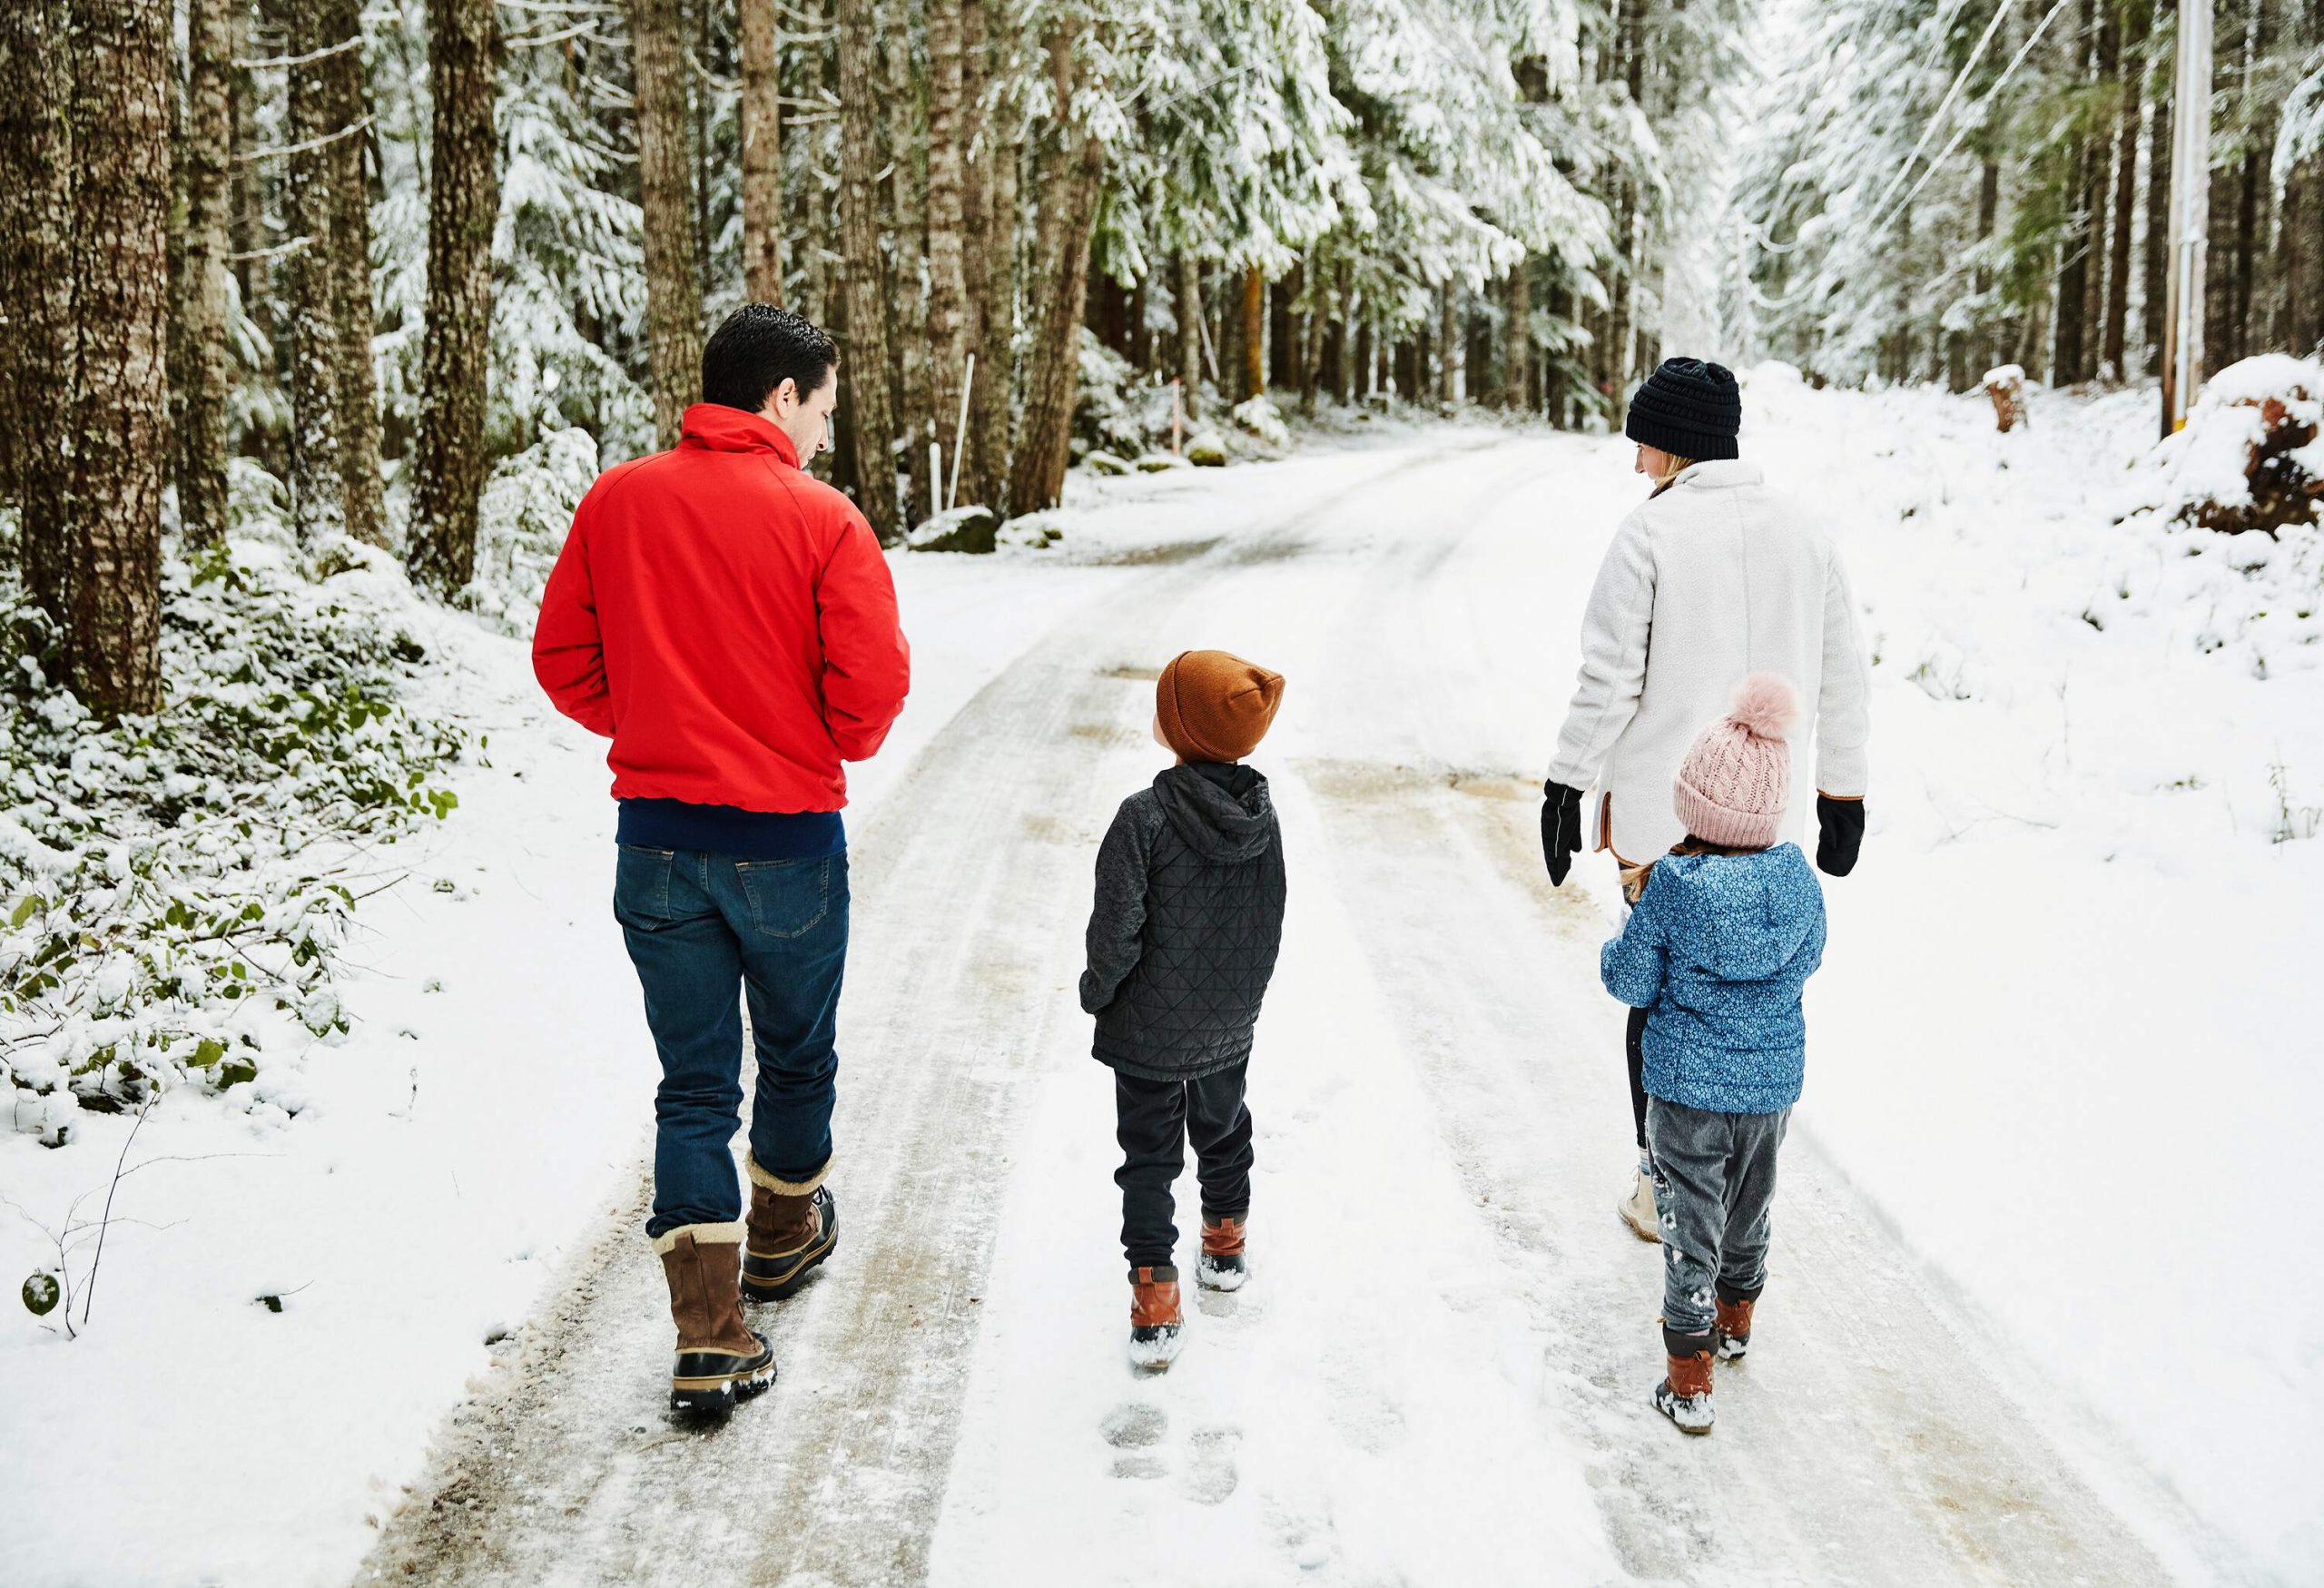 A family of four in winter attire is walking along a snowy road lined with tall frost-covered trees.